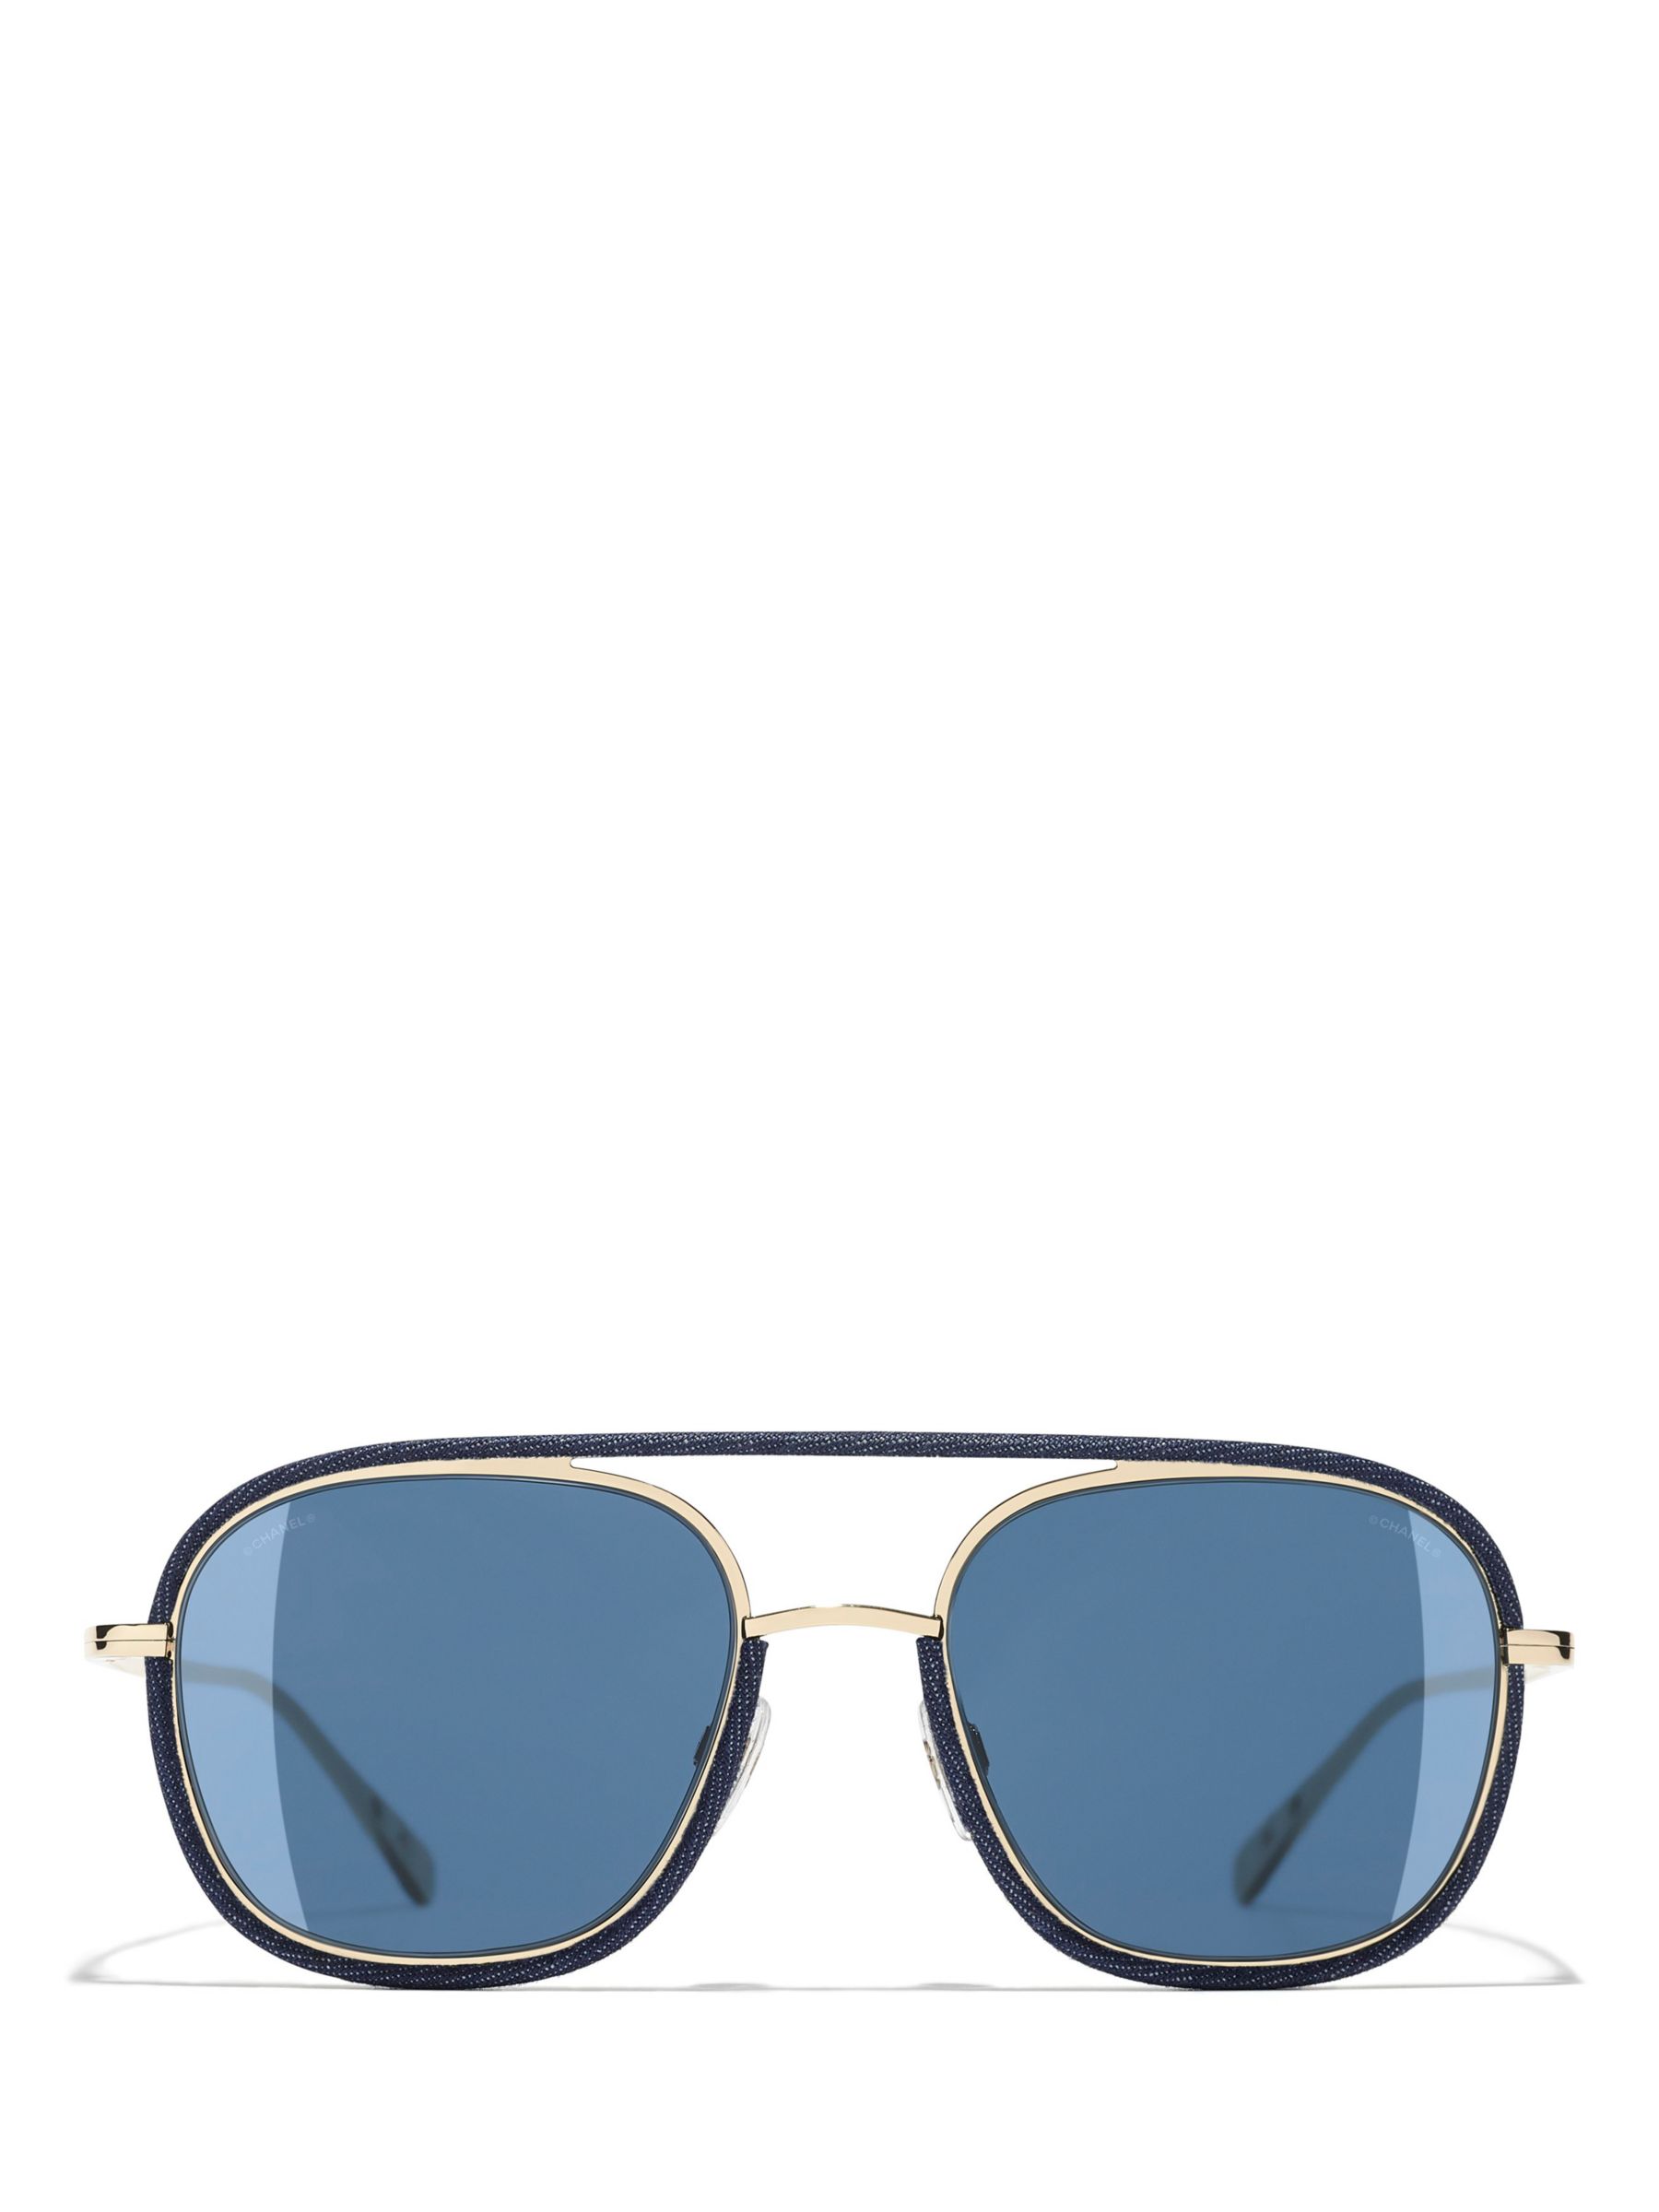 Buy CHANEL Oval Sunglasses CH4249J Gold/Blue Online at johnlewis.com